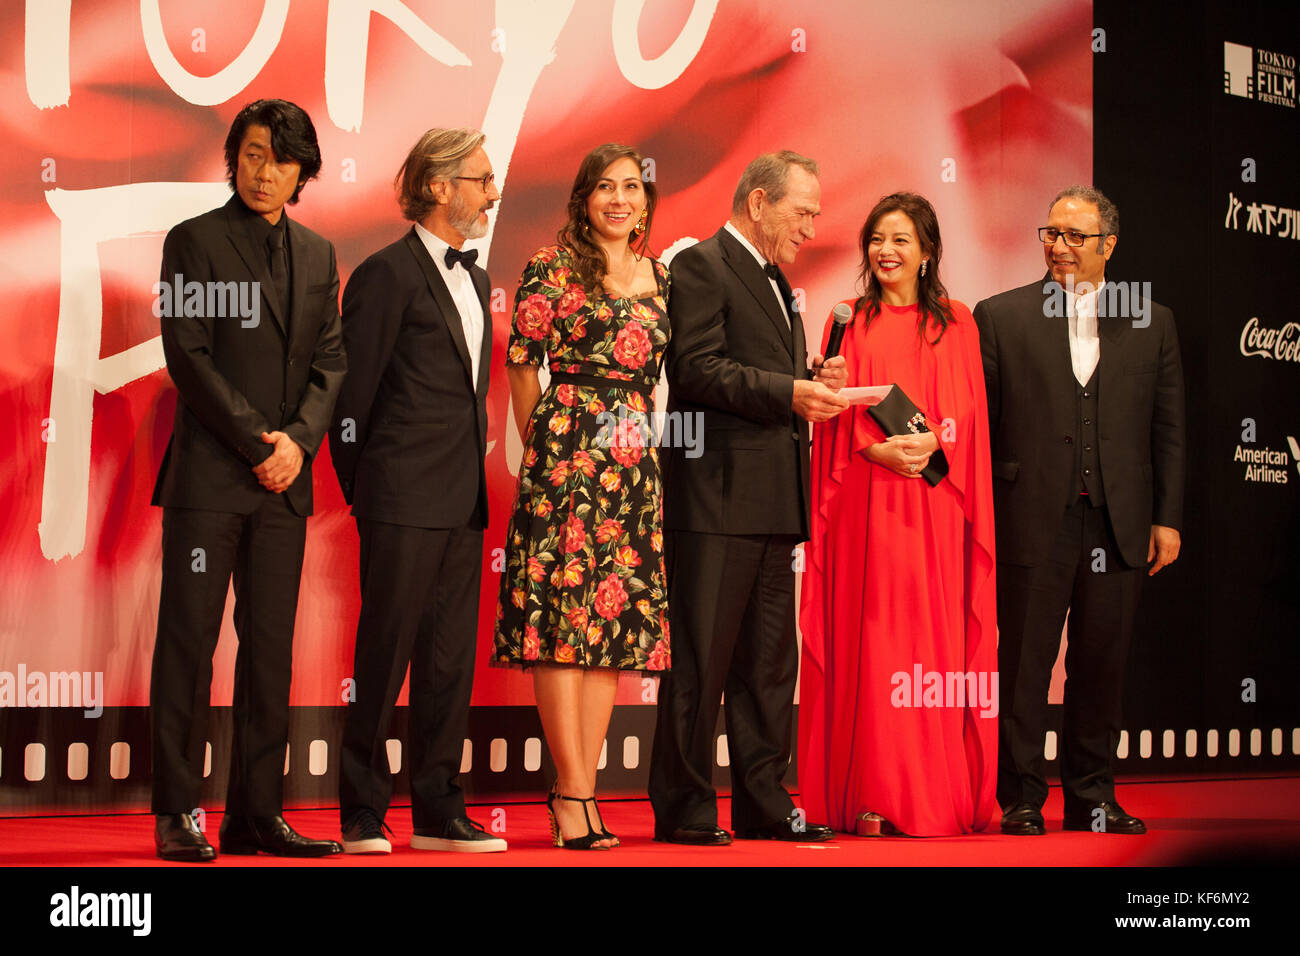 Members of the International Competition Jury, Masatoshi Nagase, Martin Provost, Victoria Jones, Tommy Lee Jones, Zhao Wei Reza Mirkarimi appears on the opening red carpet for The 30th Tokyo International Film Festival in Roppongi on October 25th, 2017, in Tokyo, Japan. The festival runs from October 25th to November 3rd at venues in Tokyo. Credit: Michael Steinebach/AFLO/Alamy Live News Stock Photo